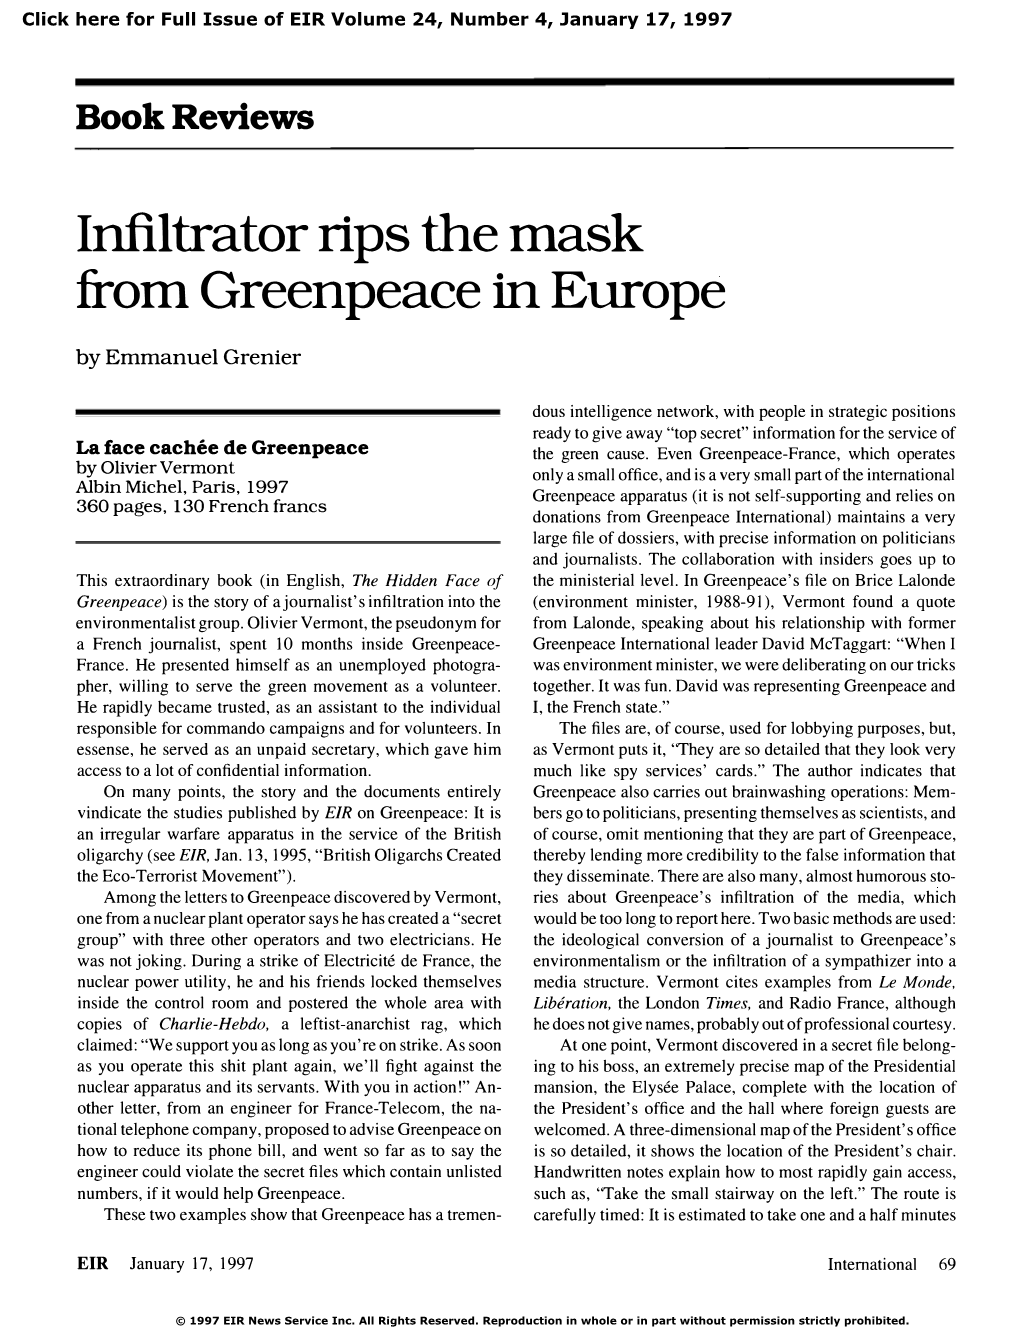 Infiltrator Rips the Mask from Greenpeace in Europe